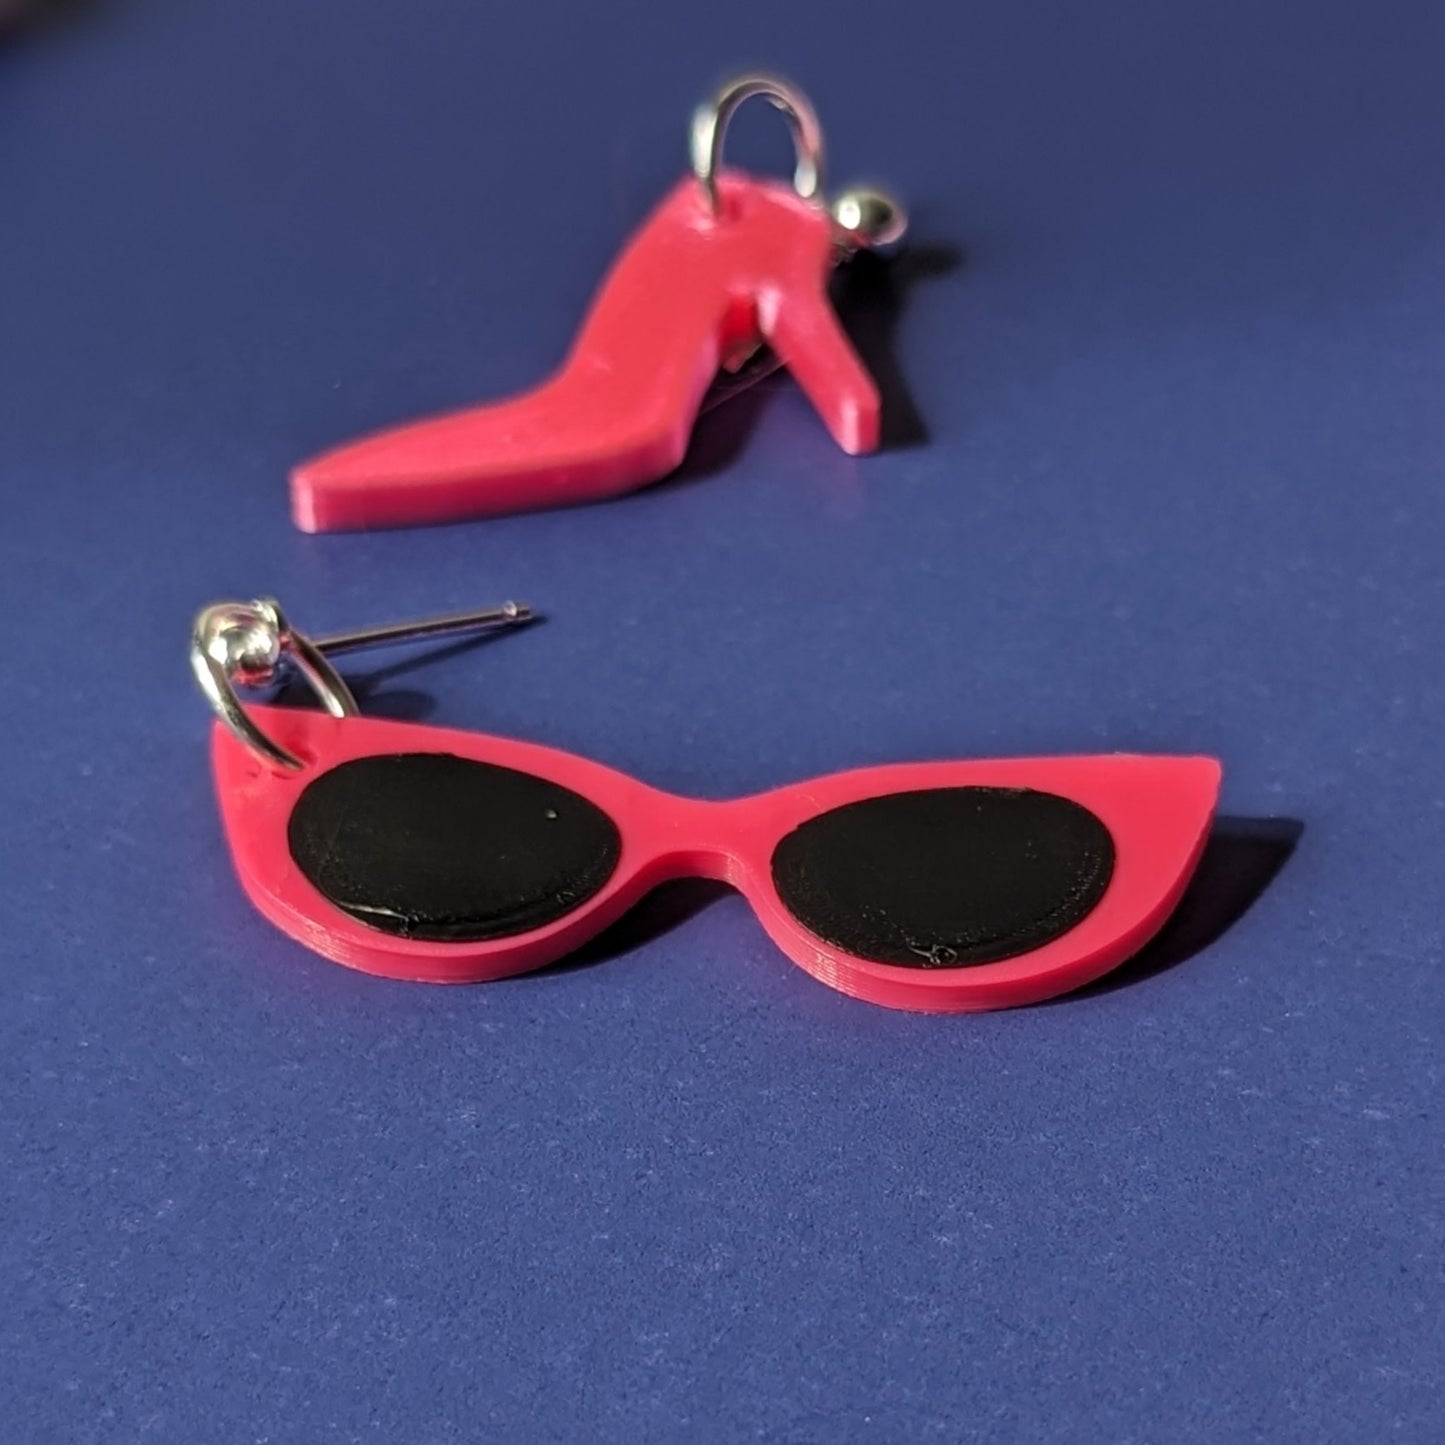 BB Classic Heel Earrings | FREE SHIPPING | The BB Collection